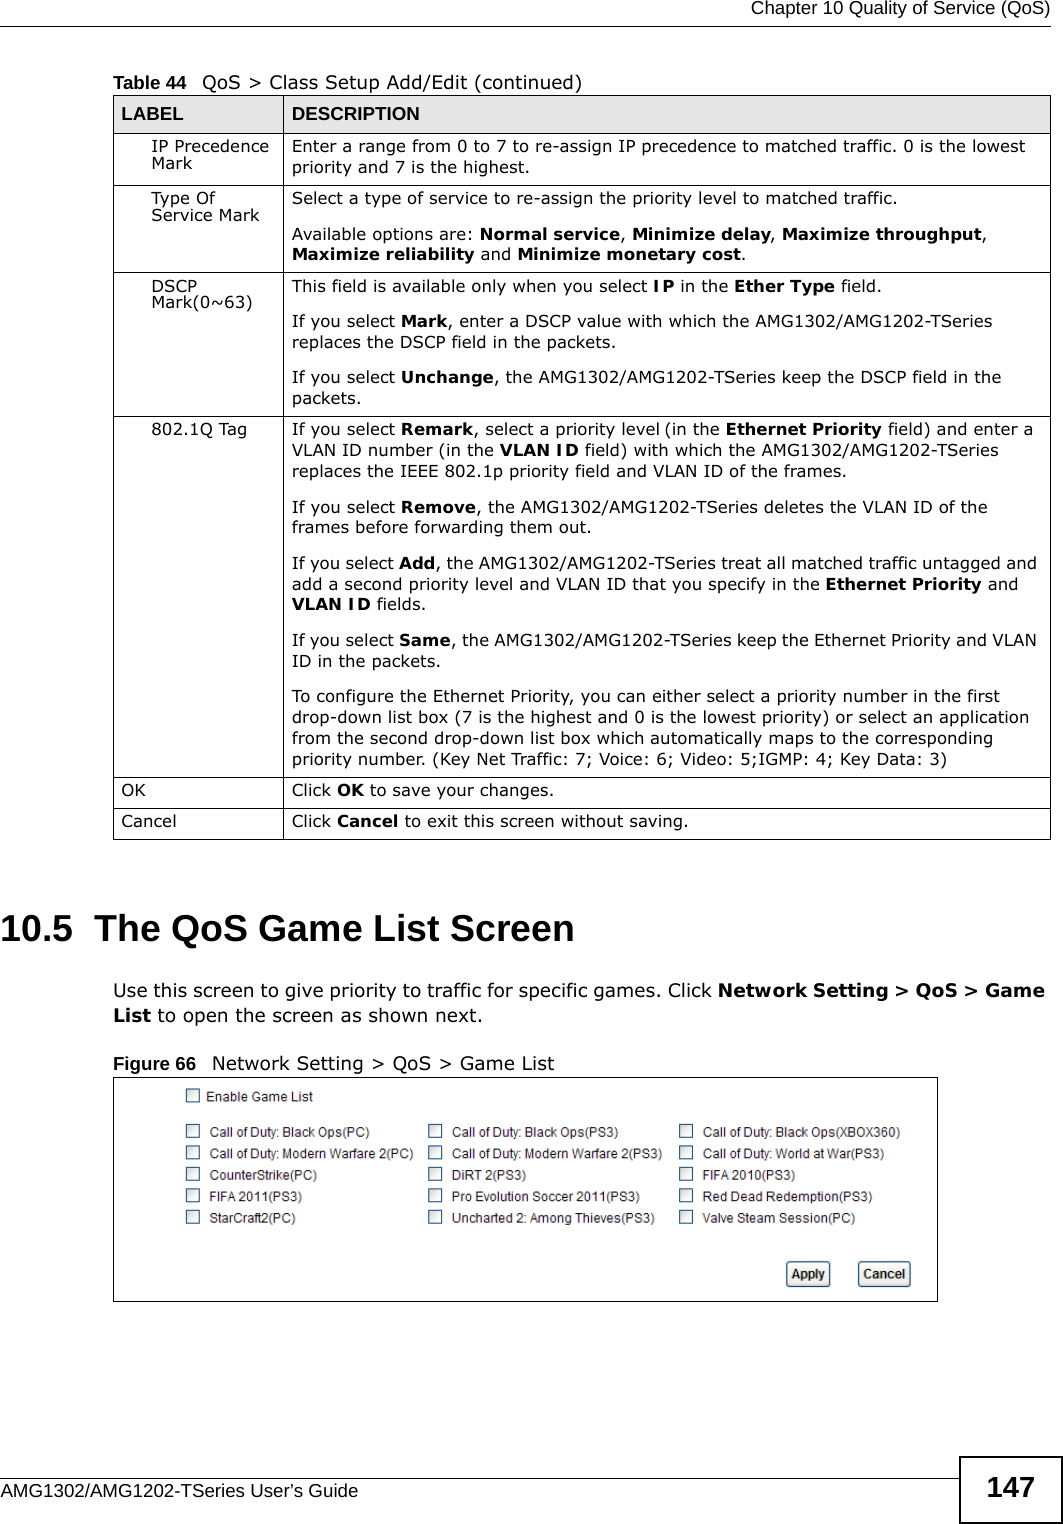  Chapter 10 Quality of Service (QoS)AMG1302/AMG1202-TSeries User’s Guide 14710.5  The QoS Game List Screen Use this screen to give priority to traffic for specific games. Click Network Setting &gt; QoS &gt; Game List to open the screen as shown next.Figure 66   Network Setting &gt; QoS &gt; Game ListIP Precedence Mark Enter a range from 0 to 7 to re-assign IP precedence to matched traffic. 0 is the lowest priority and 7 is the highest.Type Of Service Mark Select a type of service to re-assign the priority level to matched traffic.Available options are: Normal service, Minimize delay, Maximize throughput, Maximize reliability and Minimize monetary cost.DSCP Mark(0~63) This field is available only when you select IP in the Ether Type field.If you select Mark, enter a DSCP value with which the AMG1302/AMG1202-TSeries replaces the DSCP field in the packets.If you select Unchange, the AMG1302/AMG1202-TSeries keep the DSCP field in the packets.802.1Q Tag If you select Remark, select a priority level (in the Ethernet Priority field) and enter a VLAN ID number (in the VLAN ID field) with which the AMG1302/AMG1202-TSeries replaces the IEEE 802.1p priority field and VLAN ID of the frames.If you select Remove, the AMG1302/AMG1202-TSeries deletes the VLAN ID of the frames before forwarding them out.If you select Add, the AMG1302/AMG1202-TSeries treat all matched traffic untagged and add a second priority level and VLAN ID that you specify in the Ethernet Priority and VLAN ID fields.If you select Same, the AMG1302/AMG1202-TSeries keep the Ethernet Priority and VLAN ID in the packets.To configure the Ethernet Priority, you can either select a priority number in the first drop-down list box (7 is the highest and 0 is the lowest priority) or select an application from the second drop-down list box which automatically maps to the corresponding priority number. (Key Net Traffic: 7; Voice: 6; Video: 5;IGMP: 4; Key Data: 3)OK Click OK to save your changes.Cancel Click Cancel to exit this screen without saving.Table 44   QoS &gt; Class Setup Add/Edit (continued)LABEL DESCRIPTION